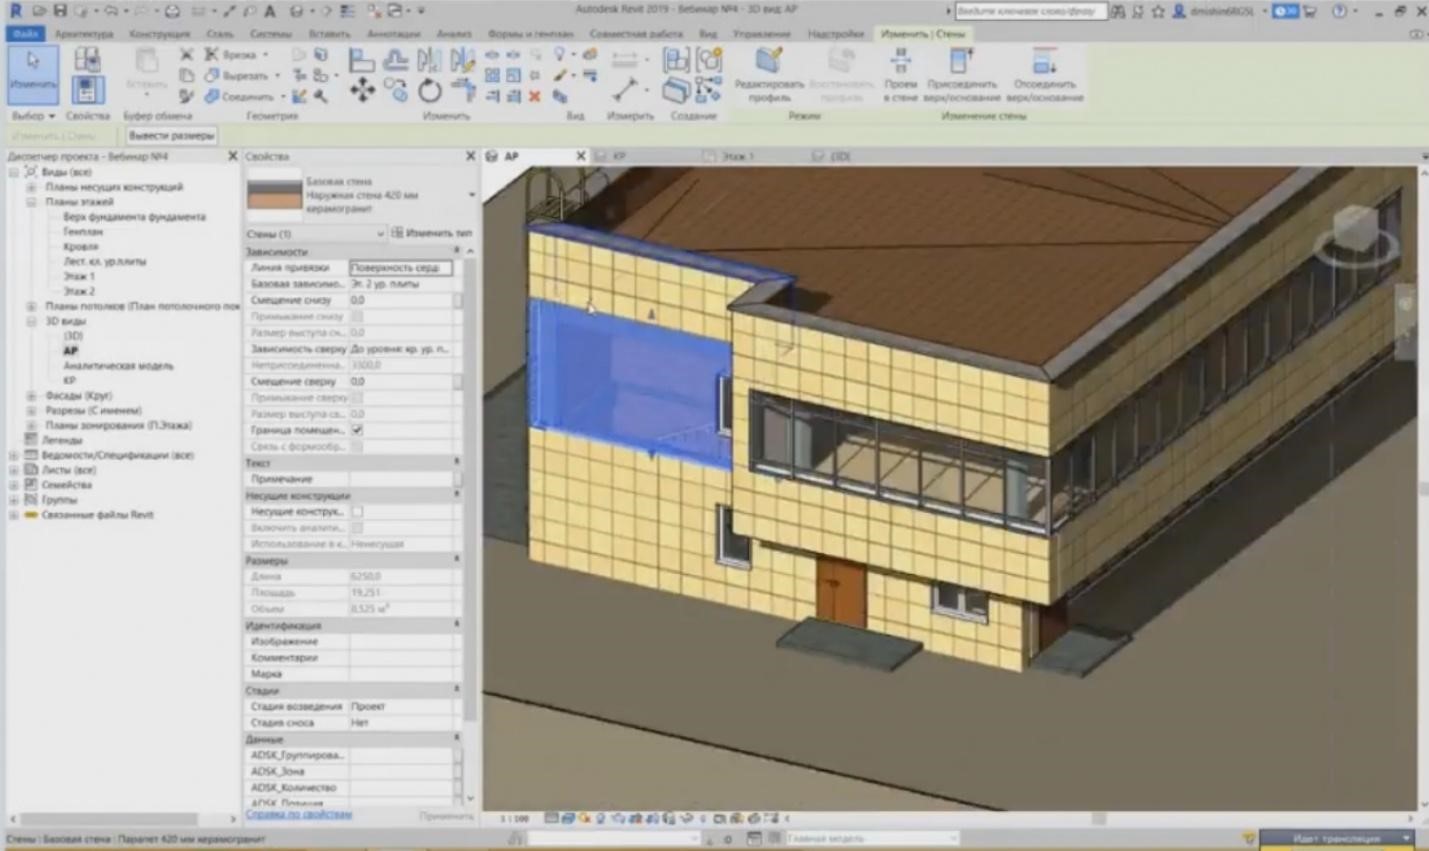 BIM DESIGN IN REVIT. CREATING ARCHITECTURAL AND STRUCTURAL ELEMENTS. PAGE 2-19